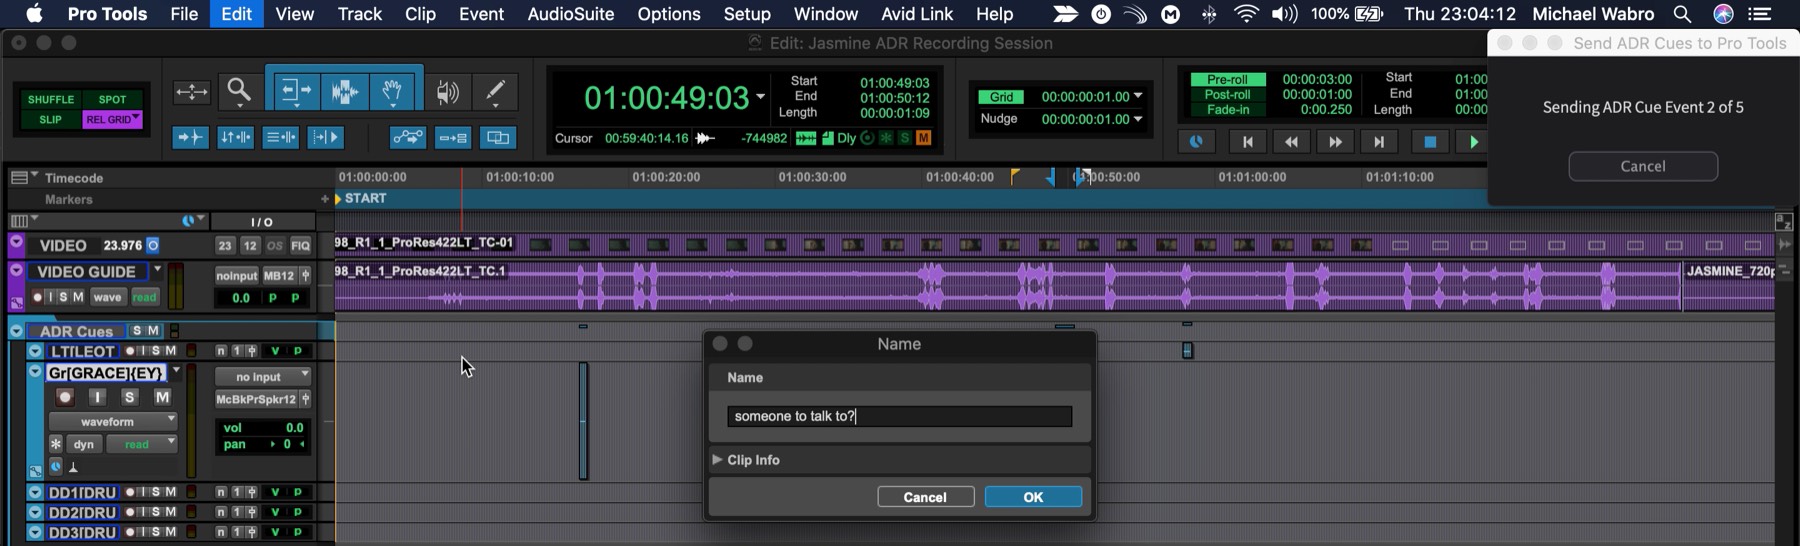 Sending selected ADR Cues to Pro Tools